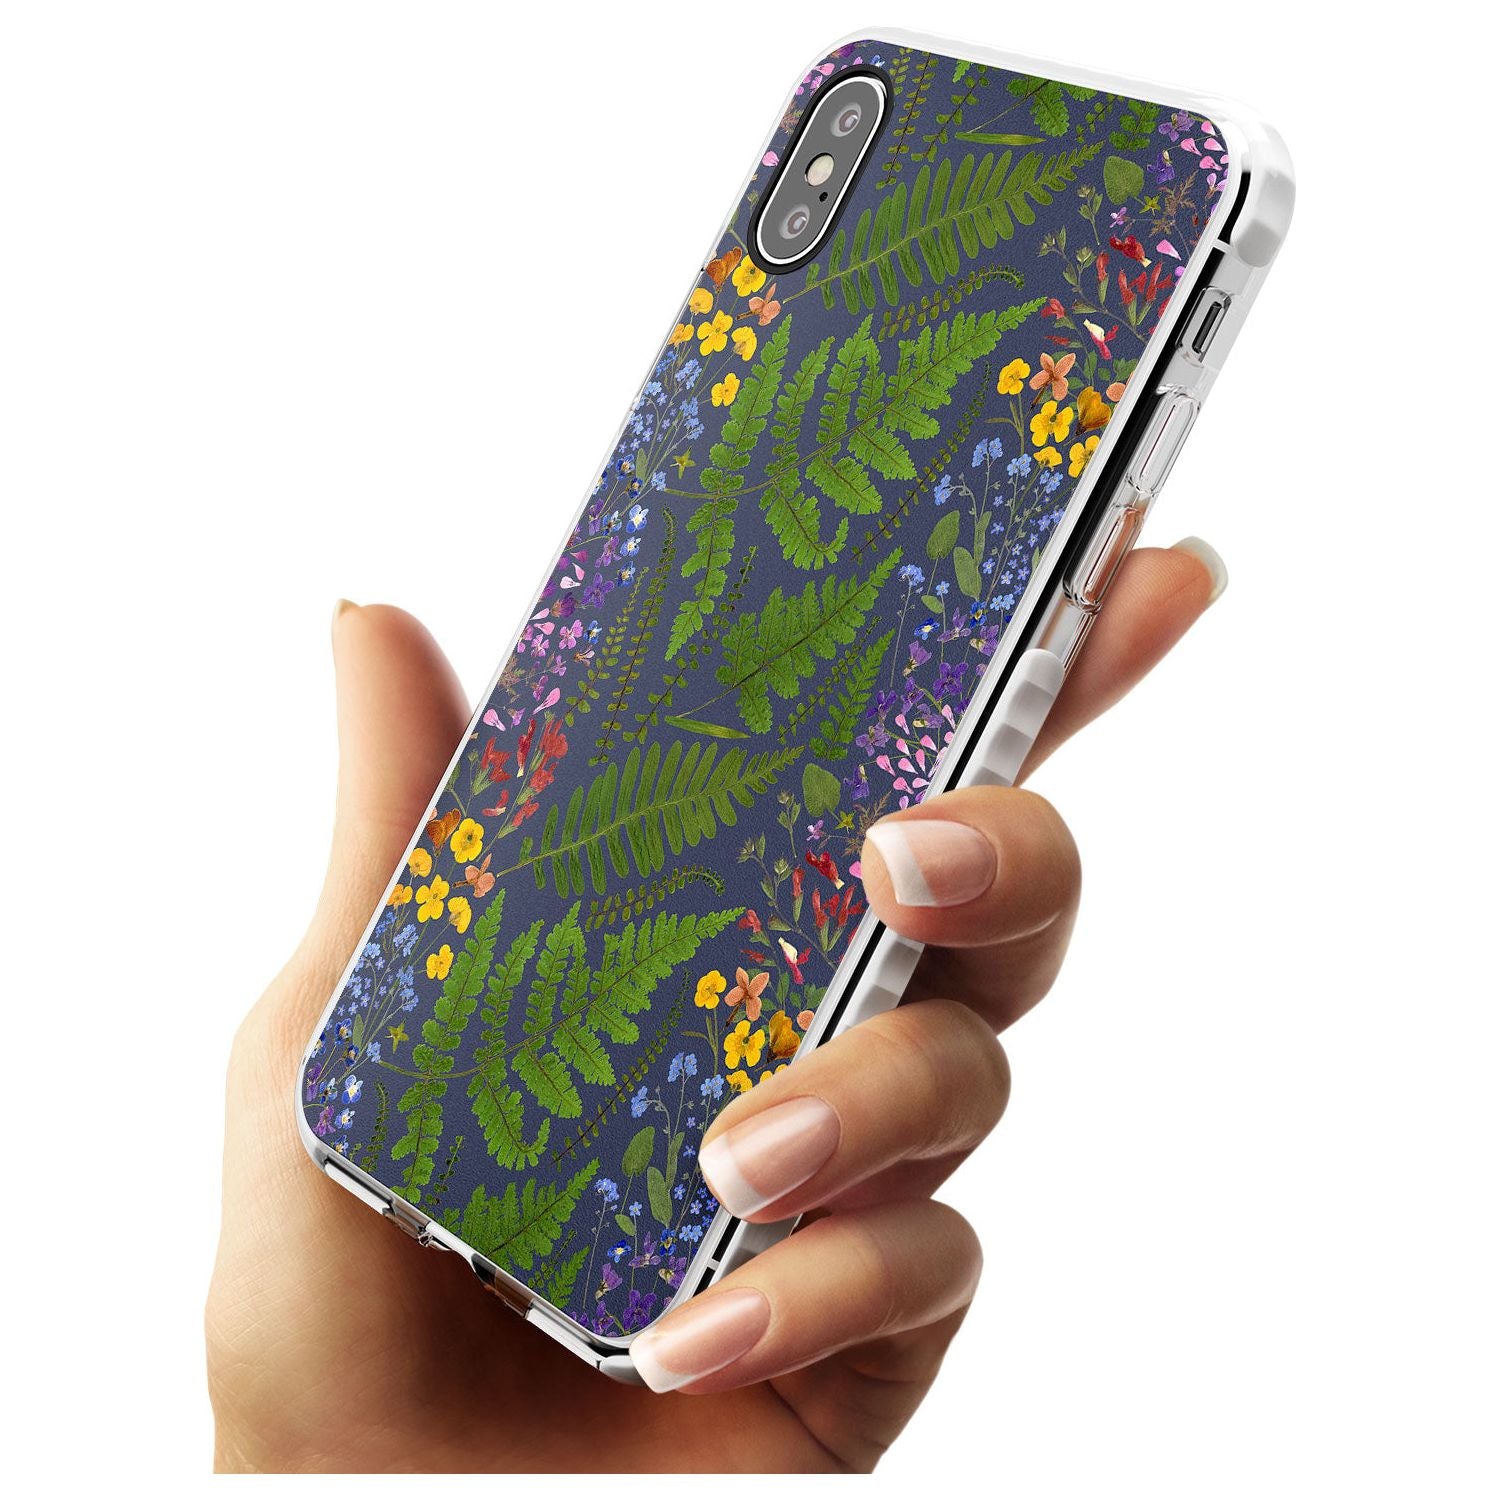 Busy Floral and Fern Design - Navy Impact Phone Case for iPhone X XS Max XR